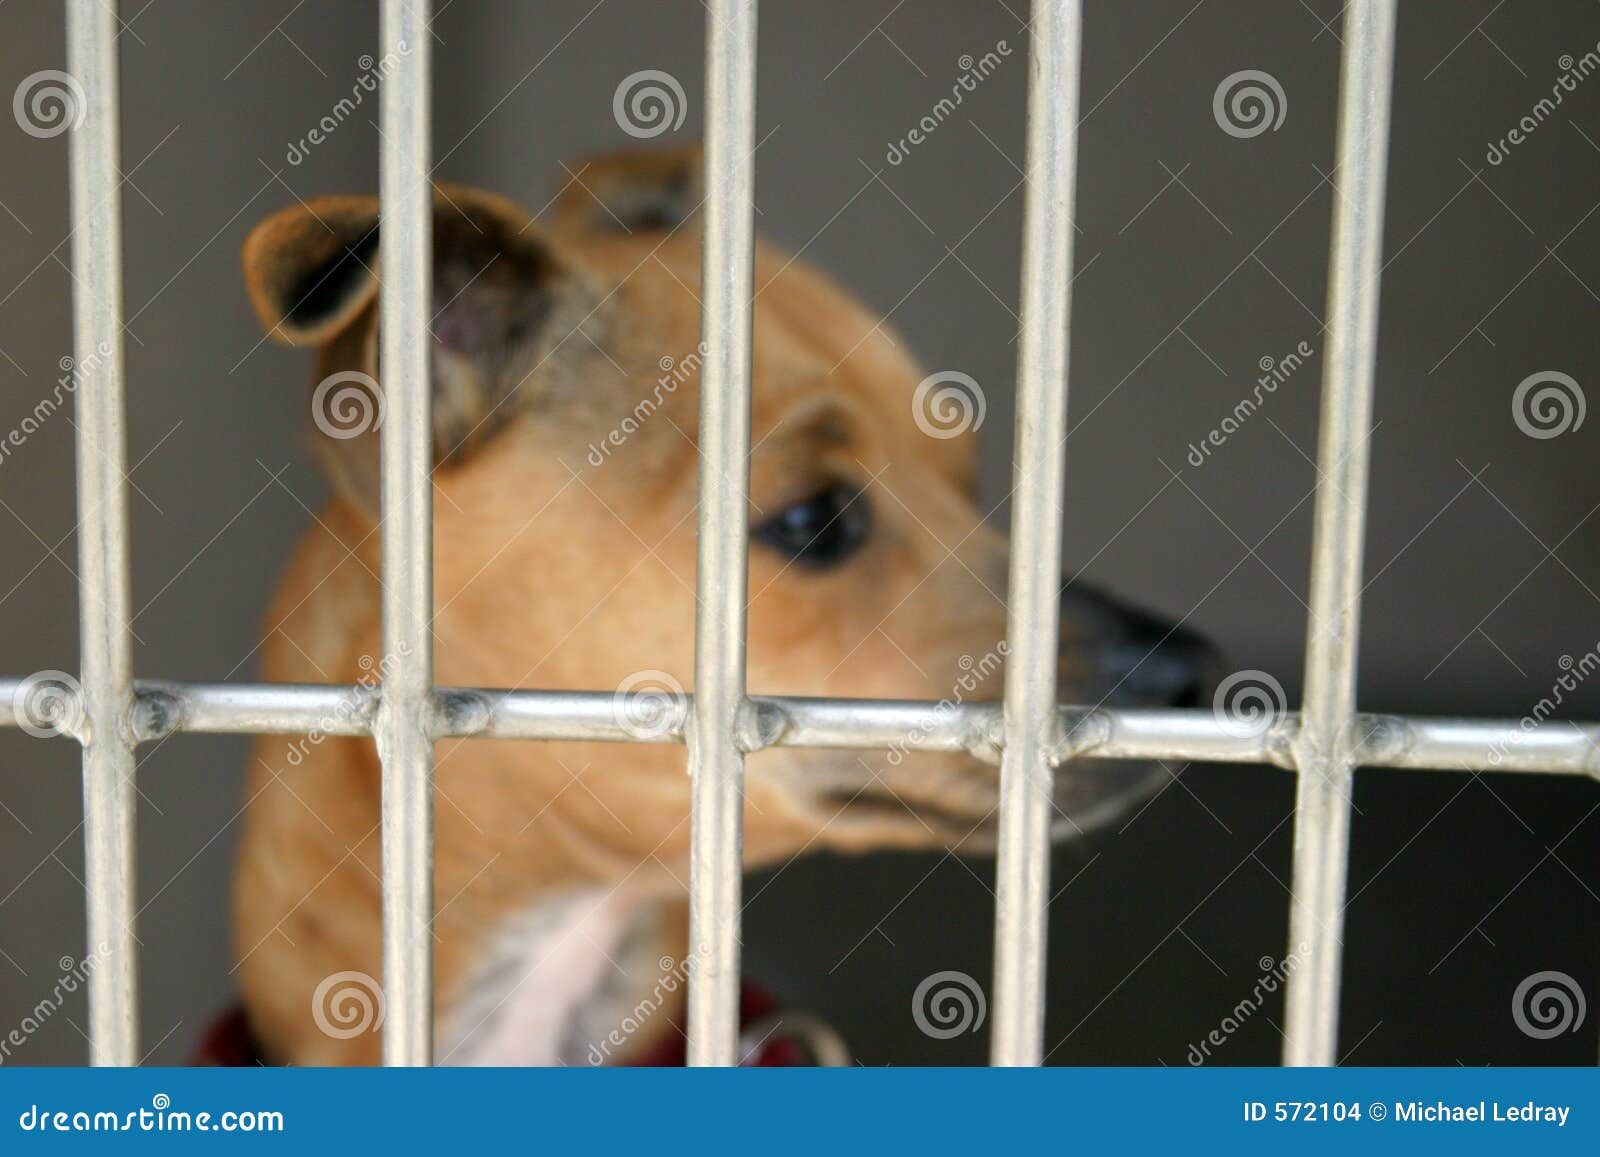 Chihuahua In A Cage At The Animal Shelter Stock Images